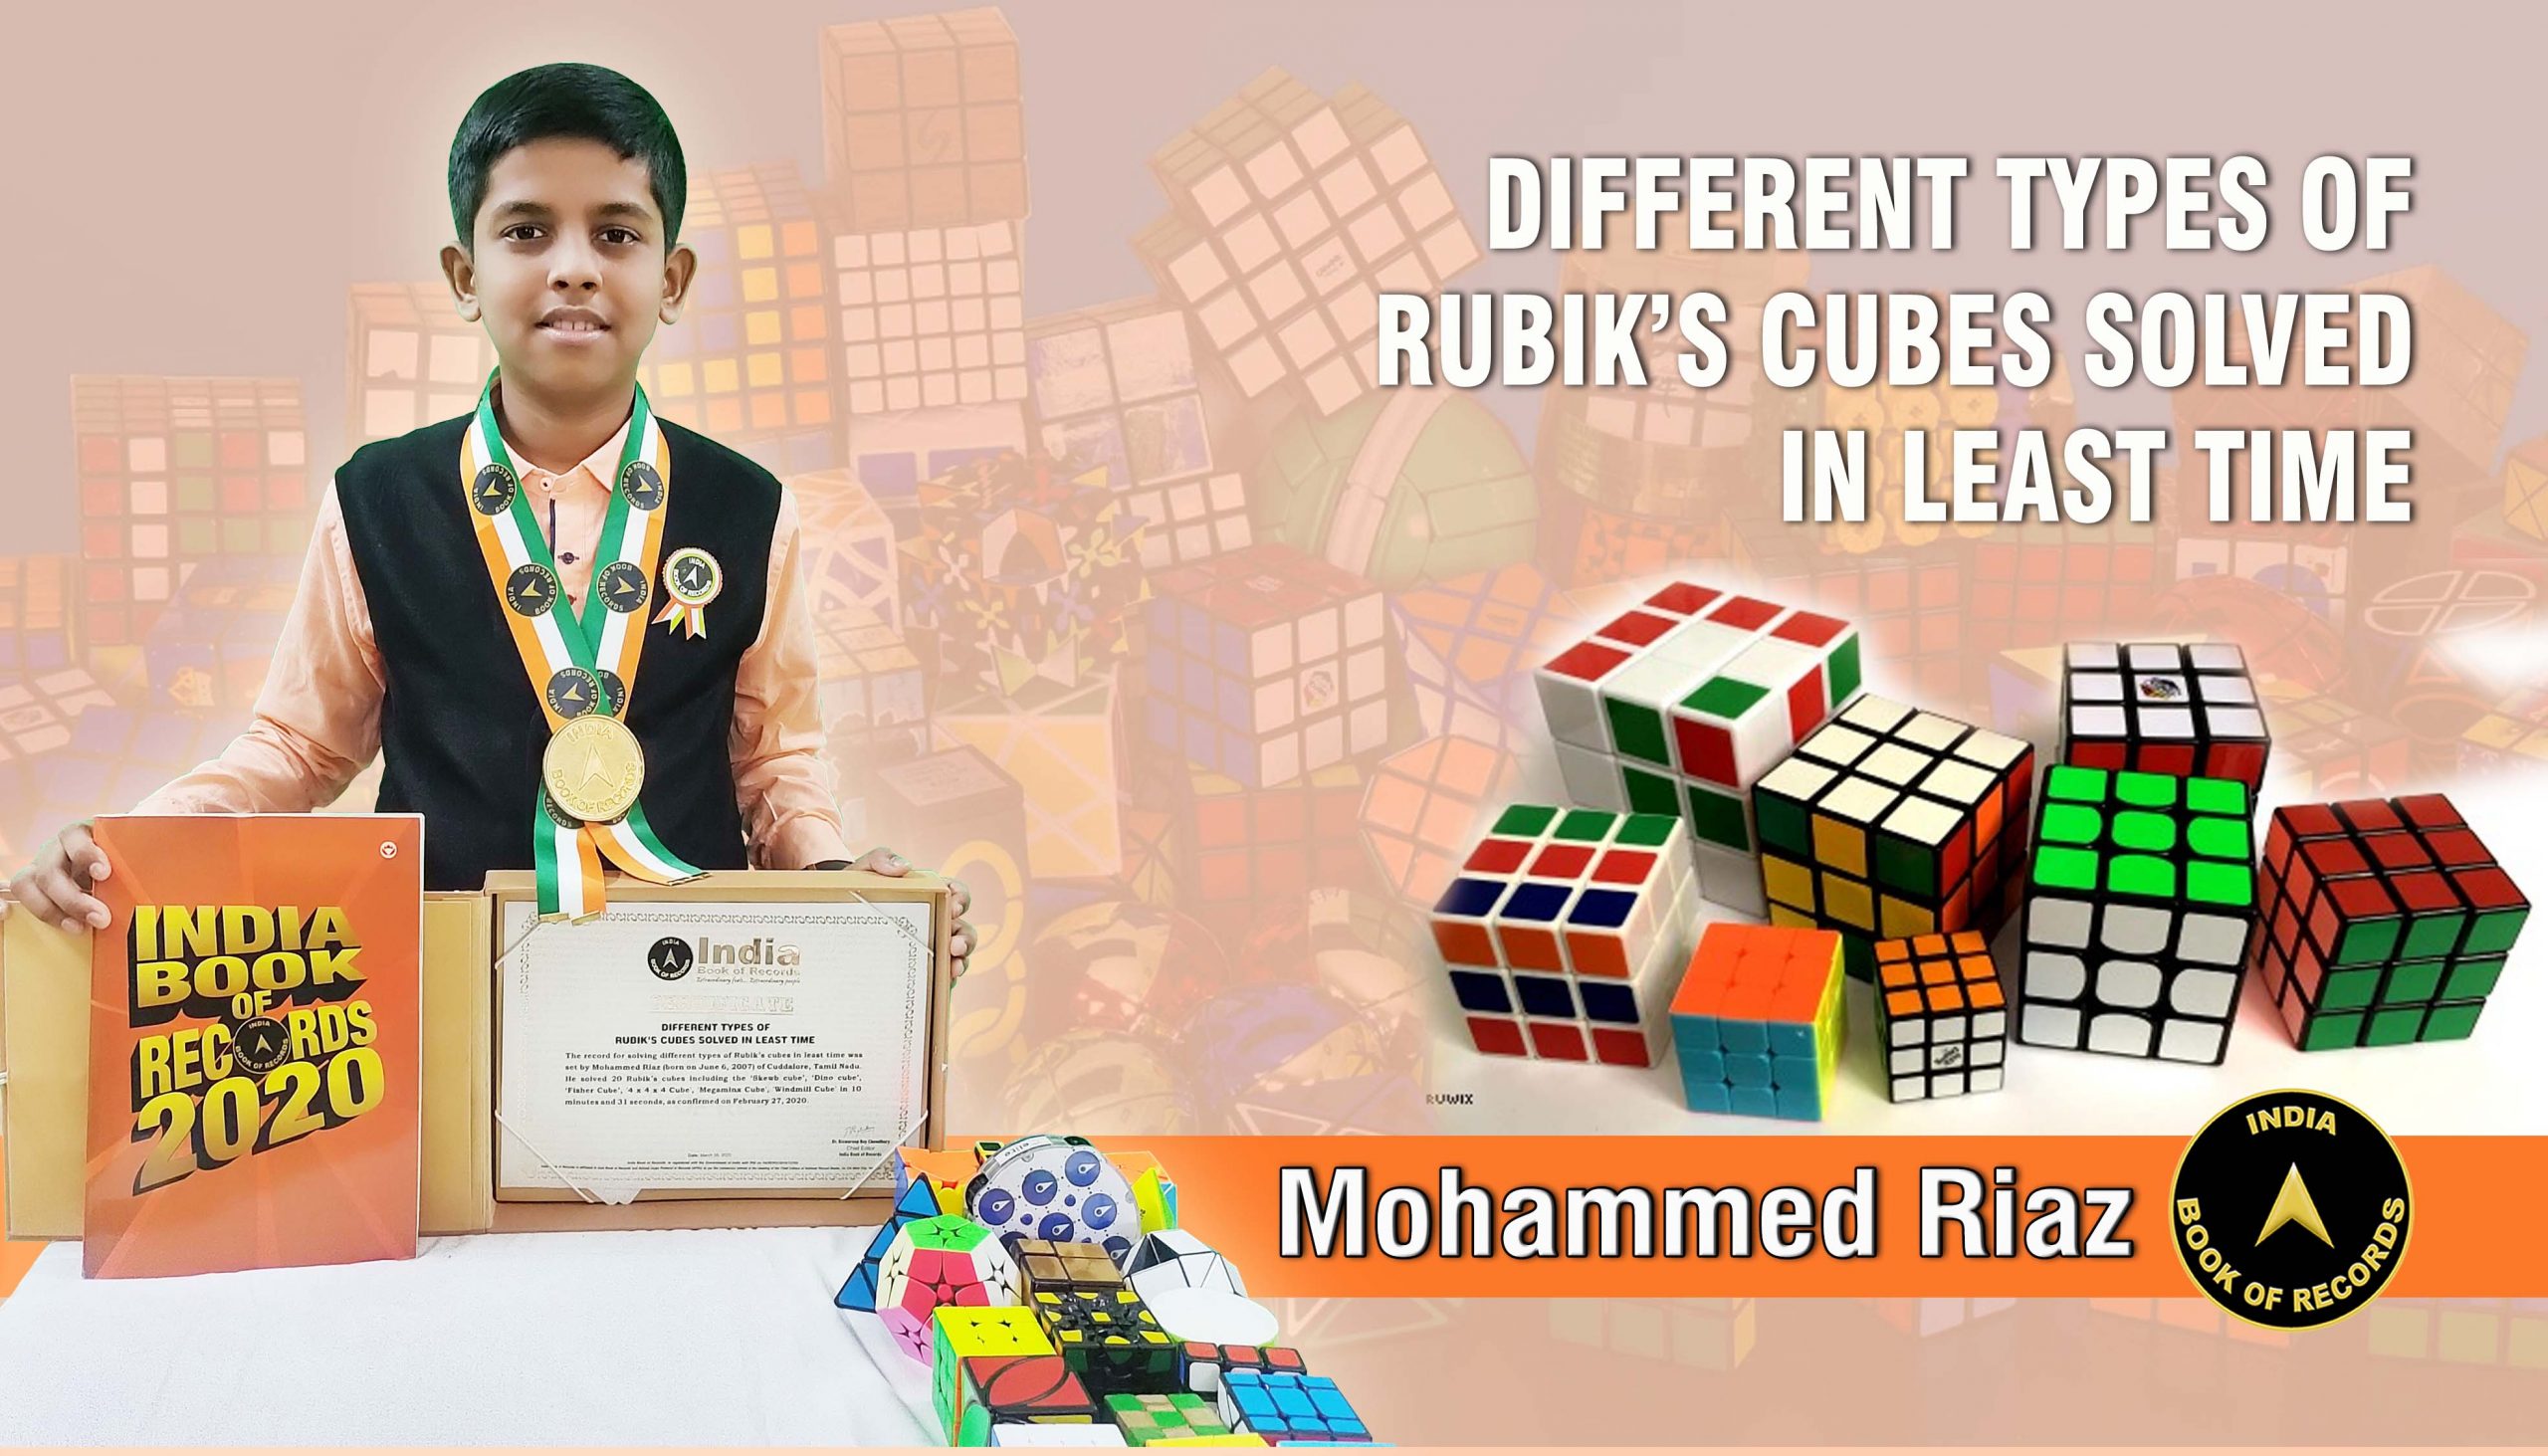 DIFFERENT TYPES OF RUBIK'S CUBES SOLVED IN LEAST TIME - IBR